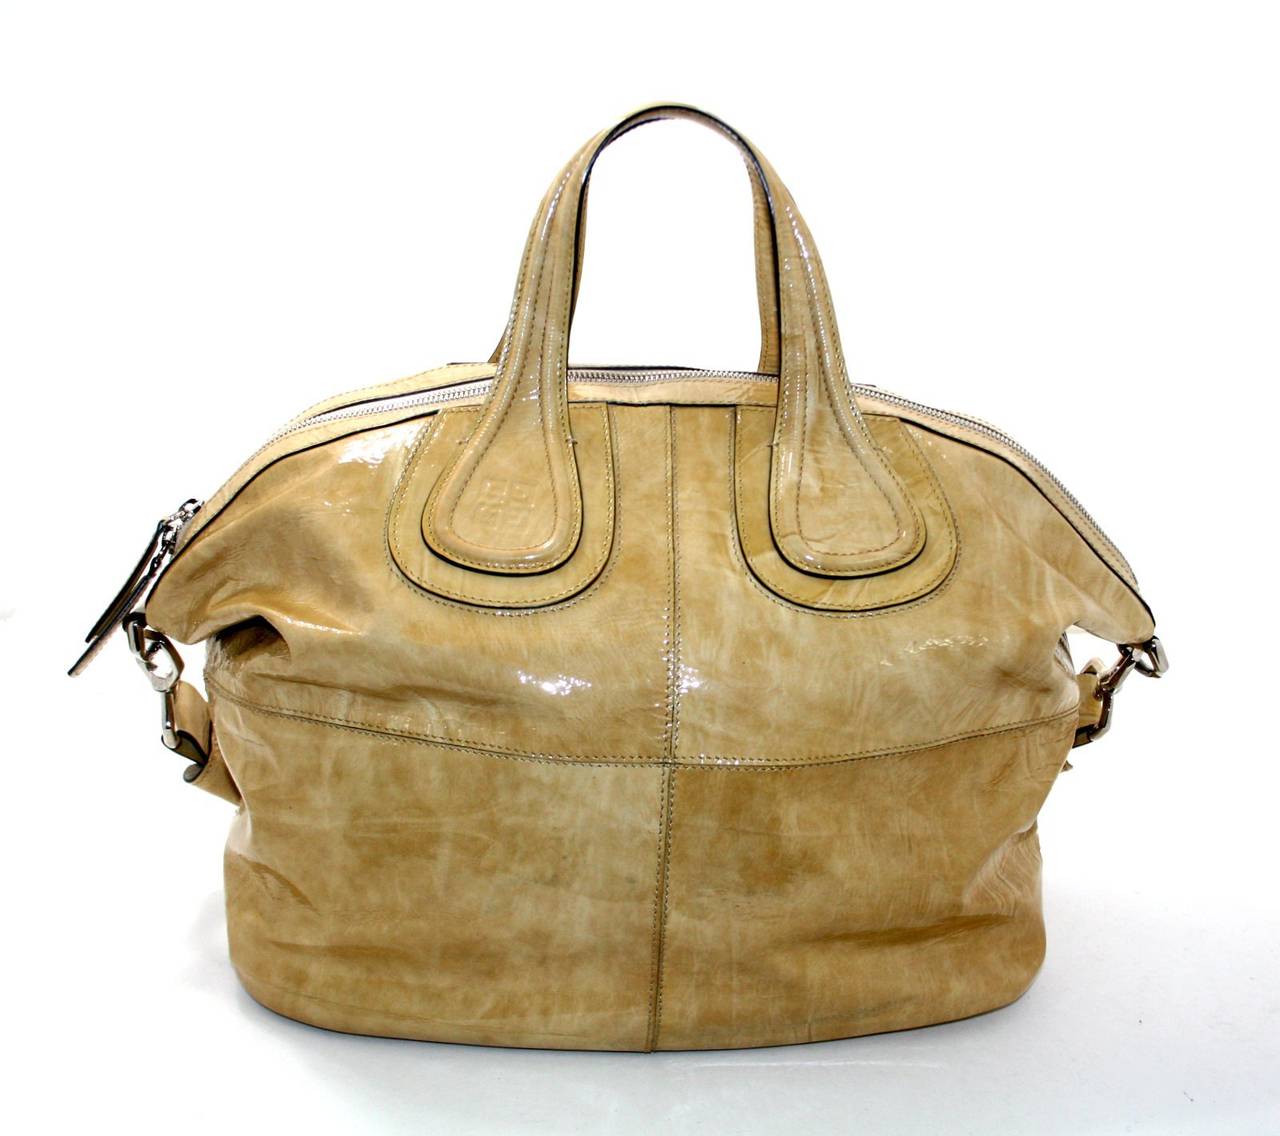 In excellent overall condition, this Givenchy Putty Patent Leather Nightingale is a totally sold out color. There are a few minor markings towards the bottom from normal use, but not very noticeable thanks to the varied coloration.   Extraordinarily